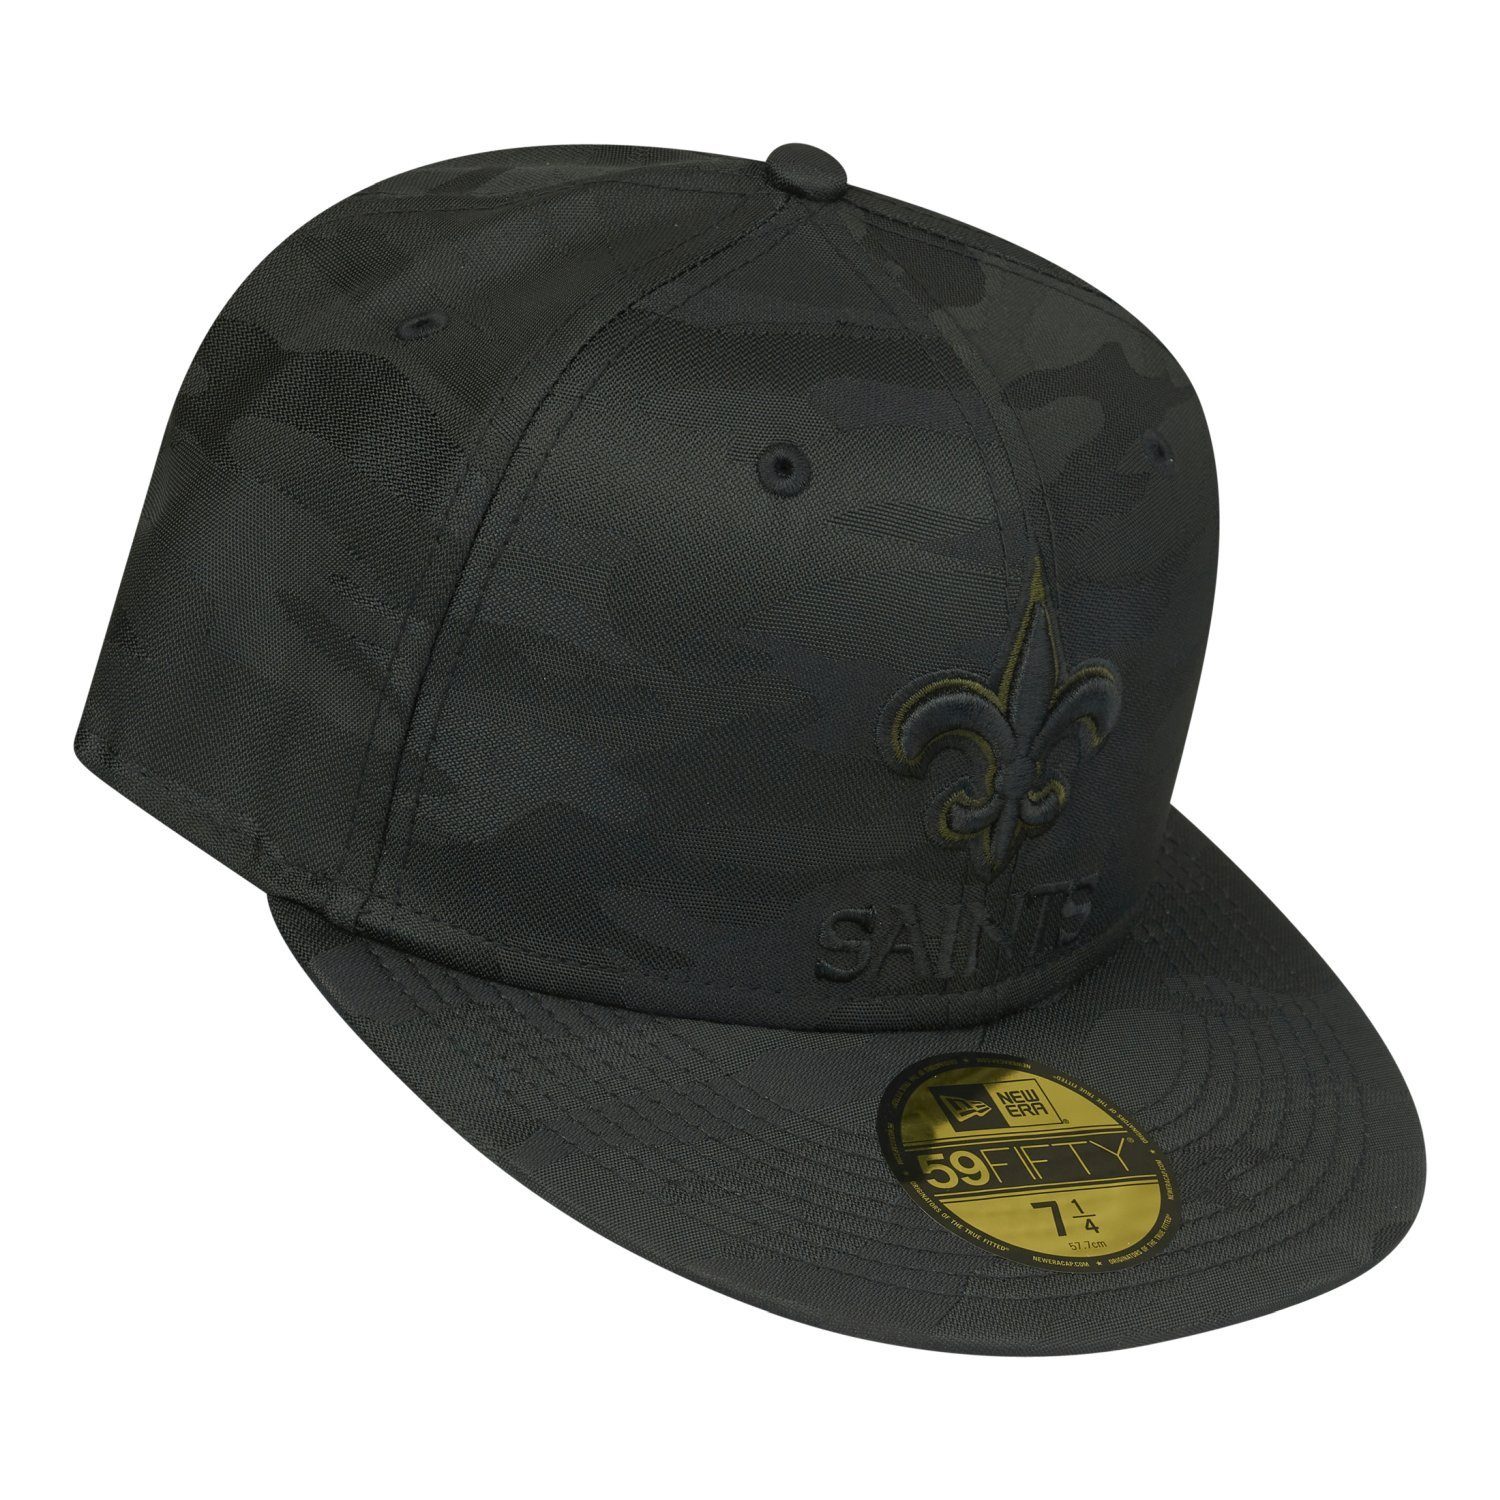 New Era Fitted Cap 59Fifty Saints NFL Orleans New TEAMS alpine